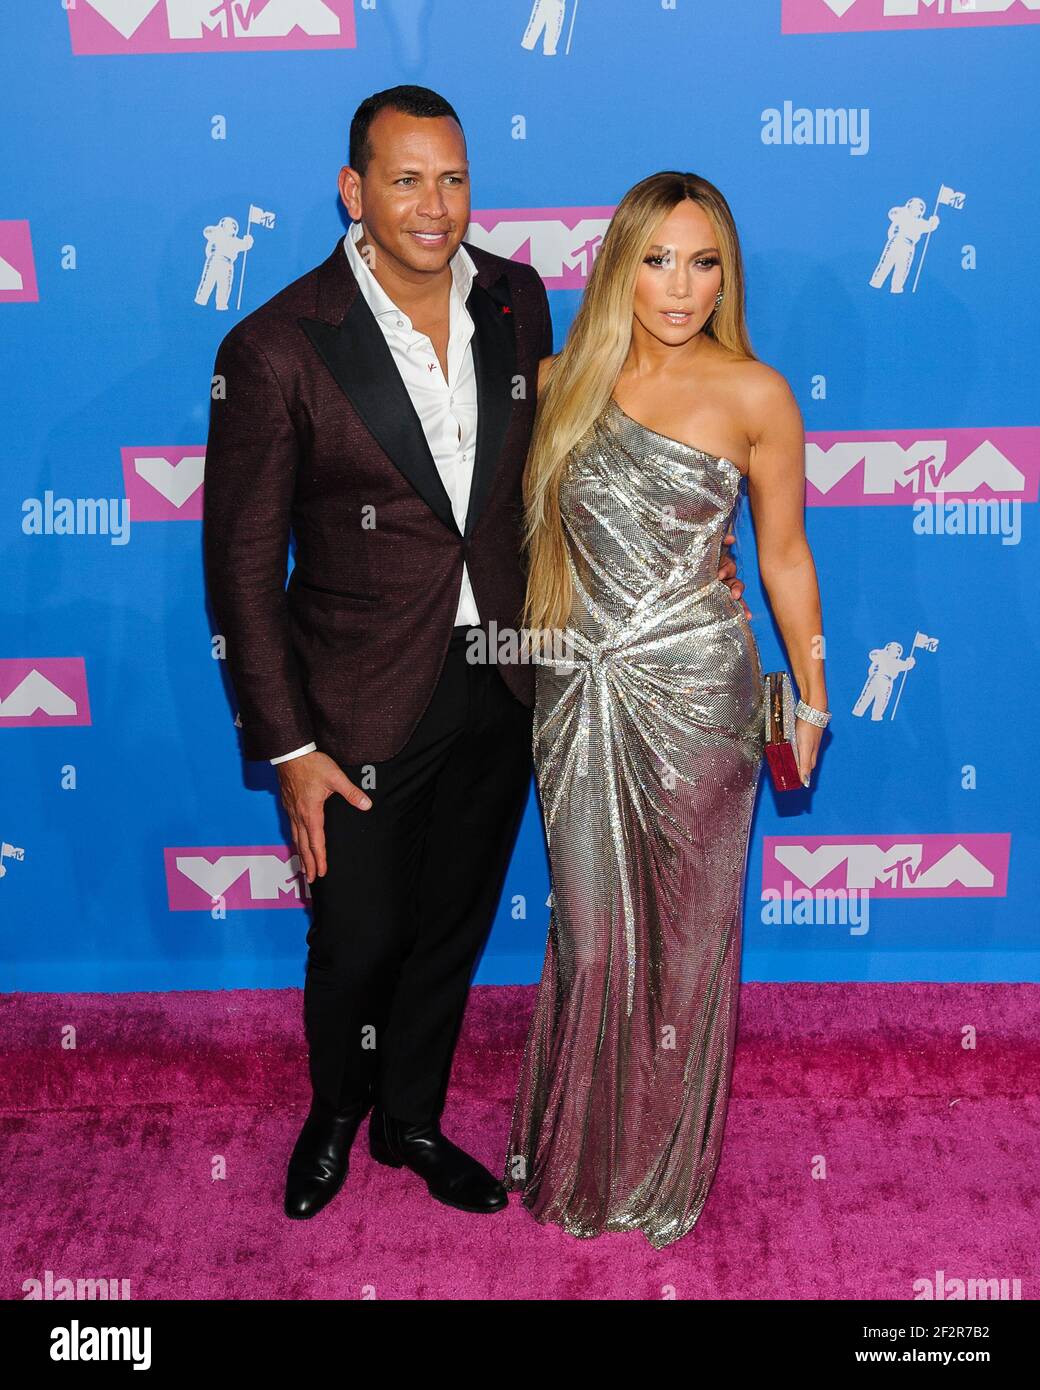 August 20, 2018 - New York, NY, U.S. - 09 March 2018 - Music icon Jennifer Lopez and retired baseball star Alex Rodriguez are engaged after two years of dating. The couple then made their red carpet debut at the Met Gala in May 2017  and have inseparable since. 20 August 2017 - New York, New York - Alexander Rodriguez, Jennifer Lopez. 2018 MTV Video Music Awards at Radio City Music Hall. Photo Credit: Mario Santoro/AdMedia (Credit Image: © Mario Santoro/AdMedia via ZUMA Wire) Stock Photo